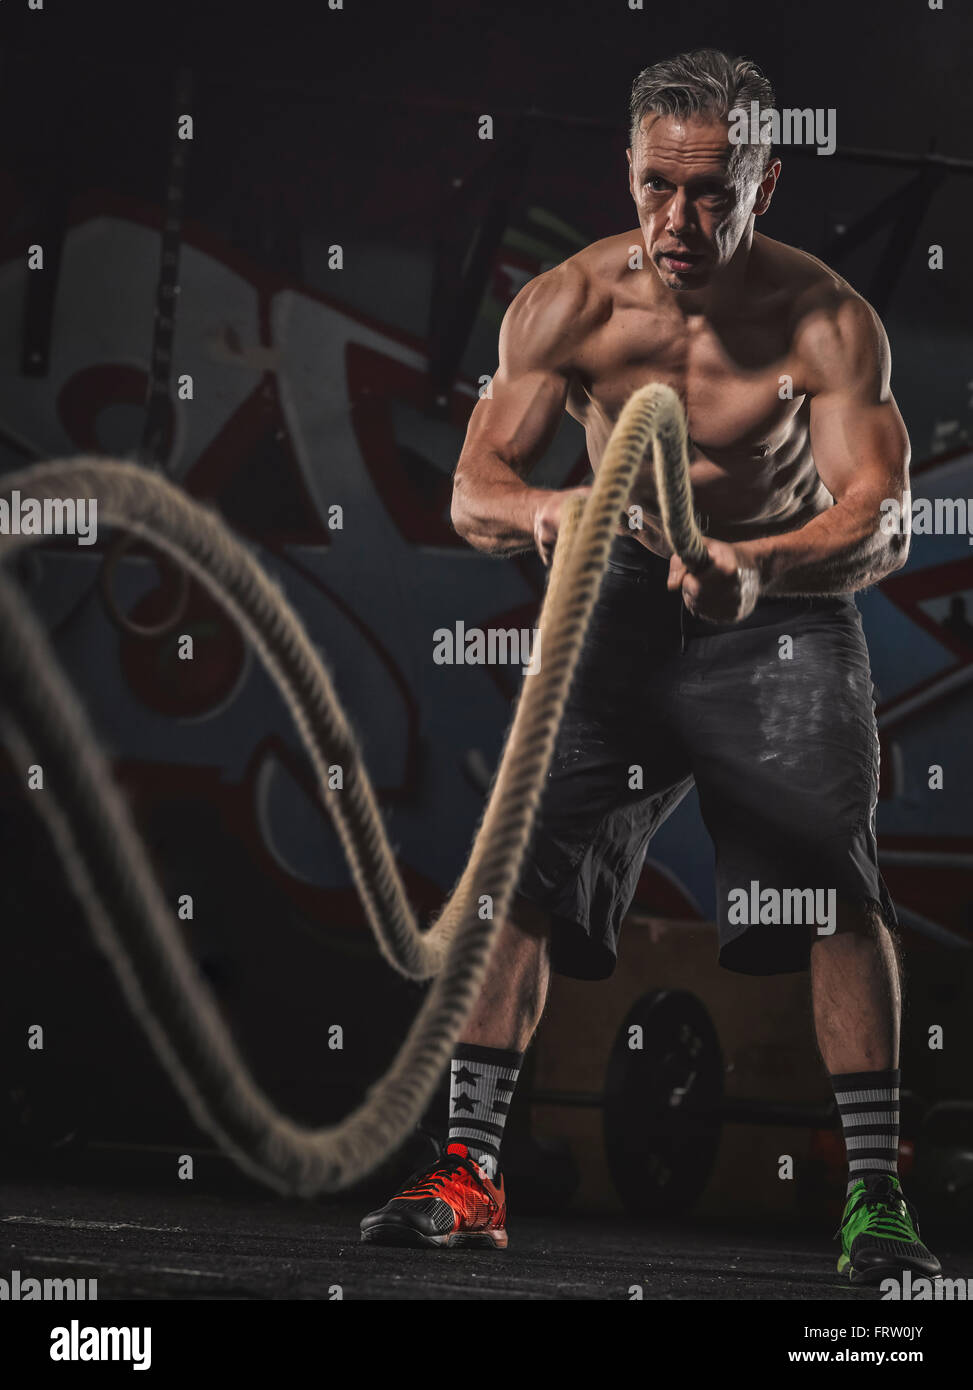 Mature crossfit athlete exercising with ropes Stock Photo